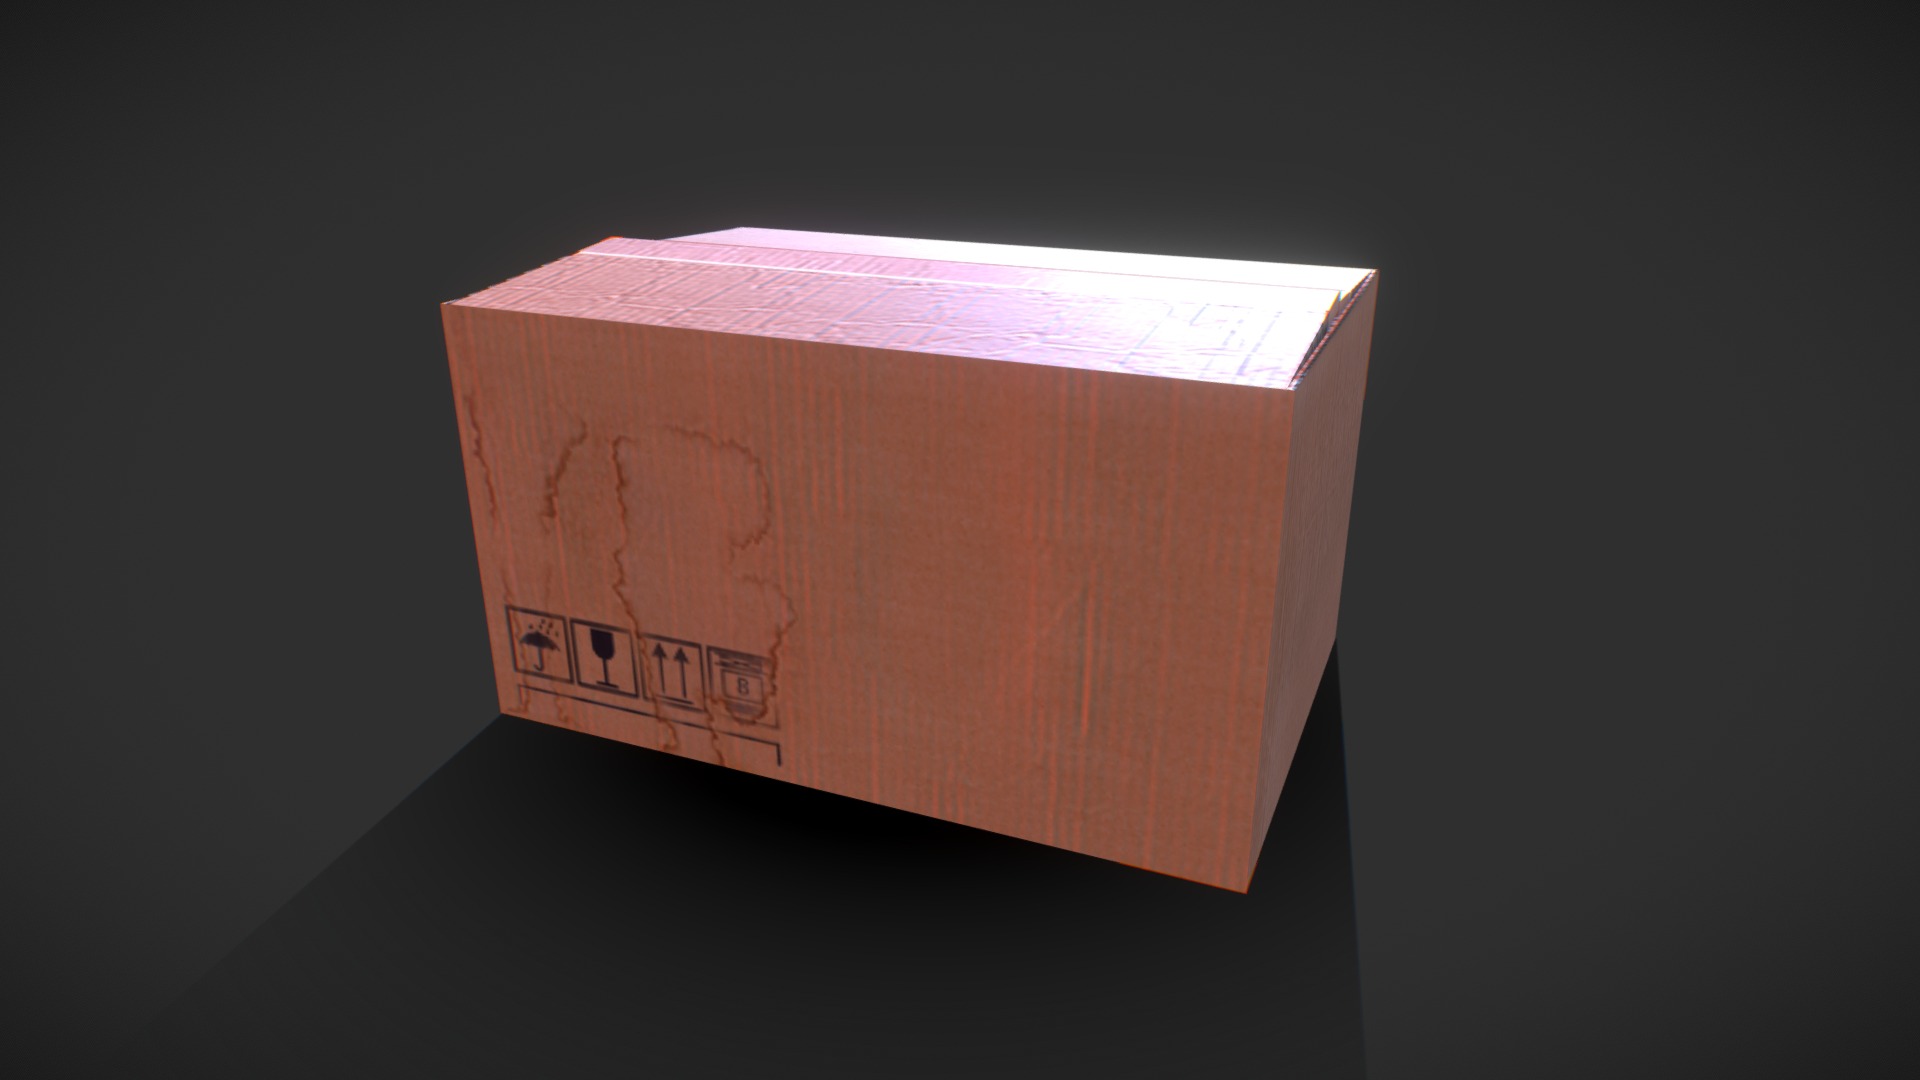 3D model Carton - This is a 3D model of the Carton. The 3D model is about a box with a label on it.